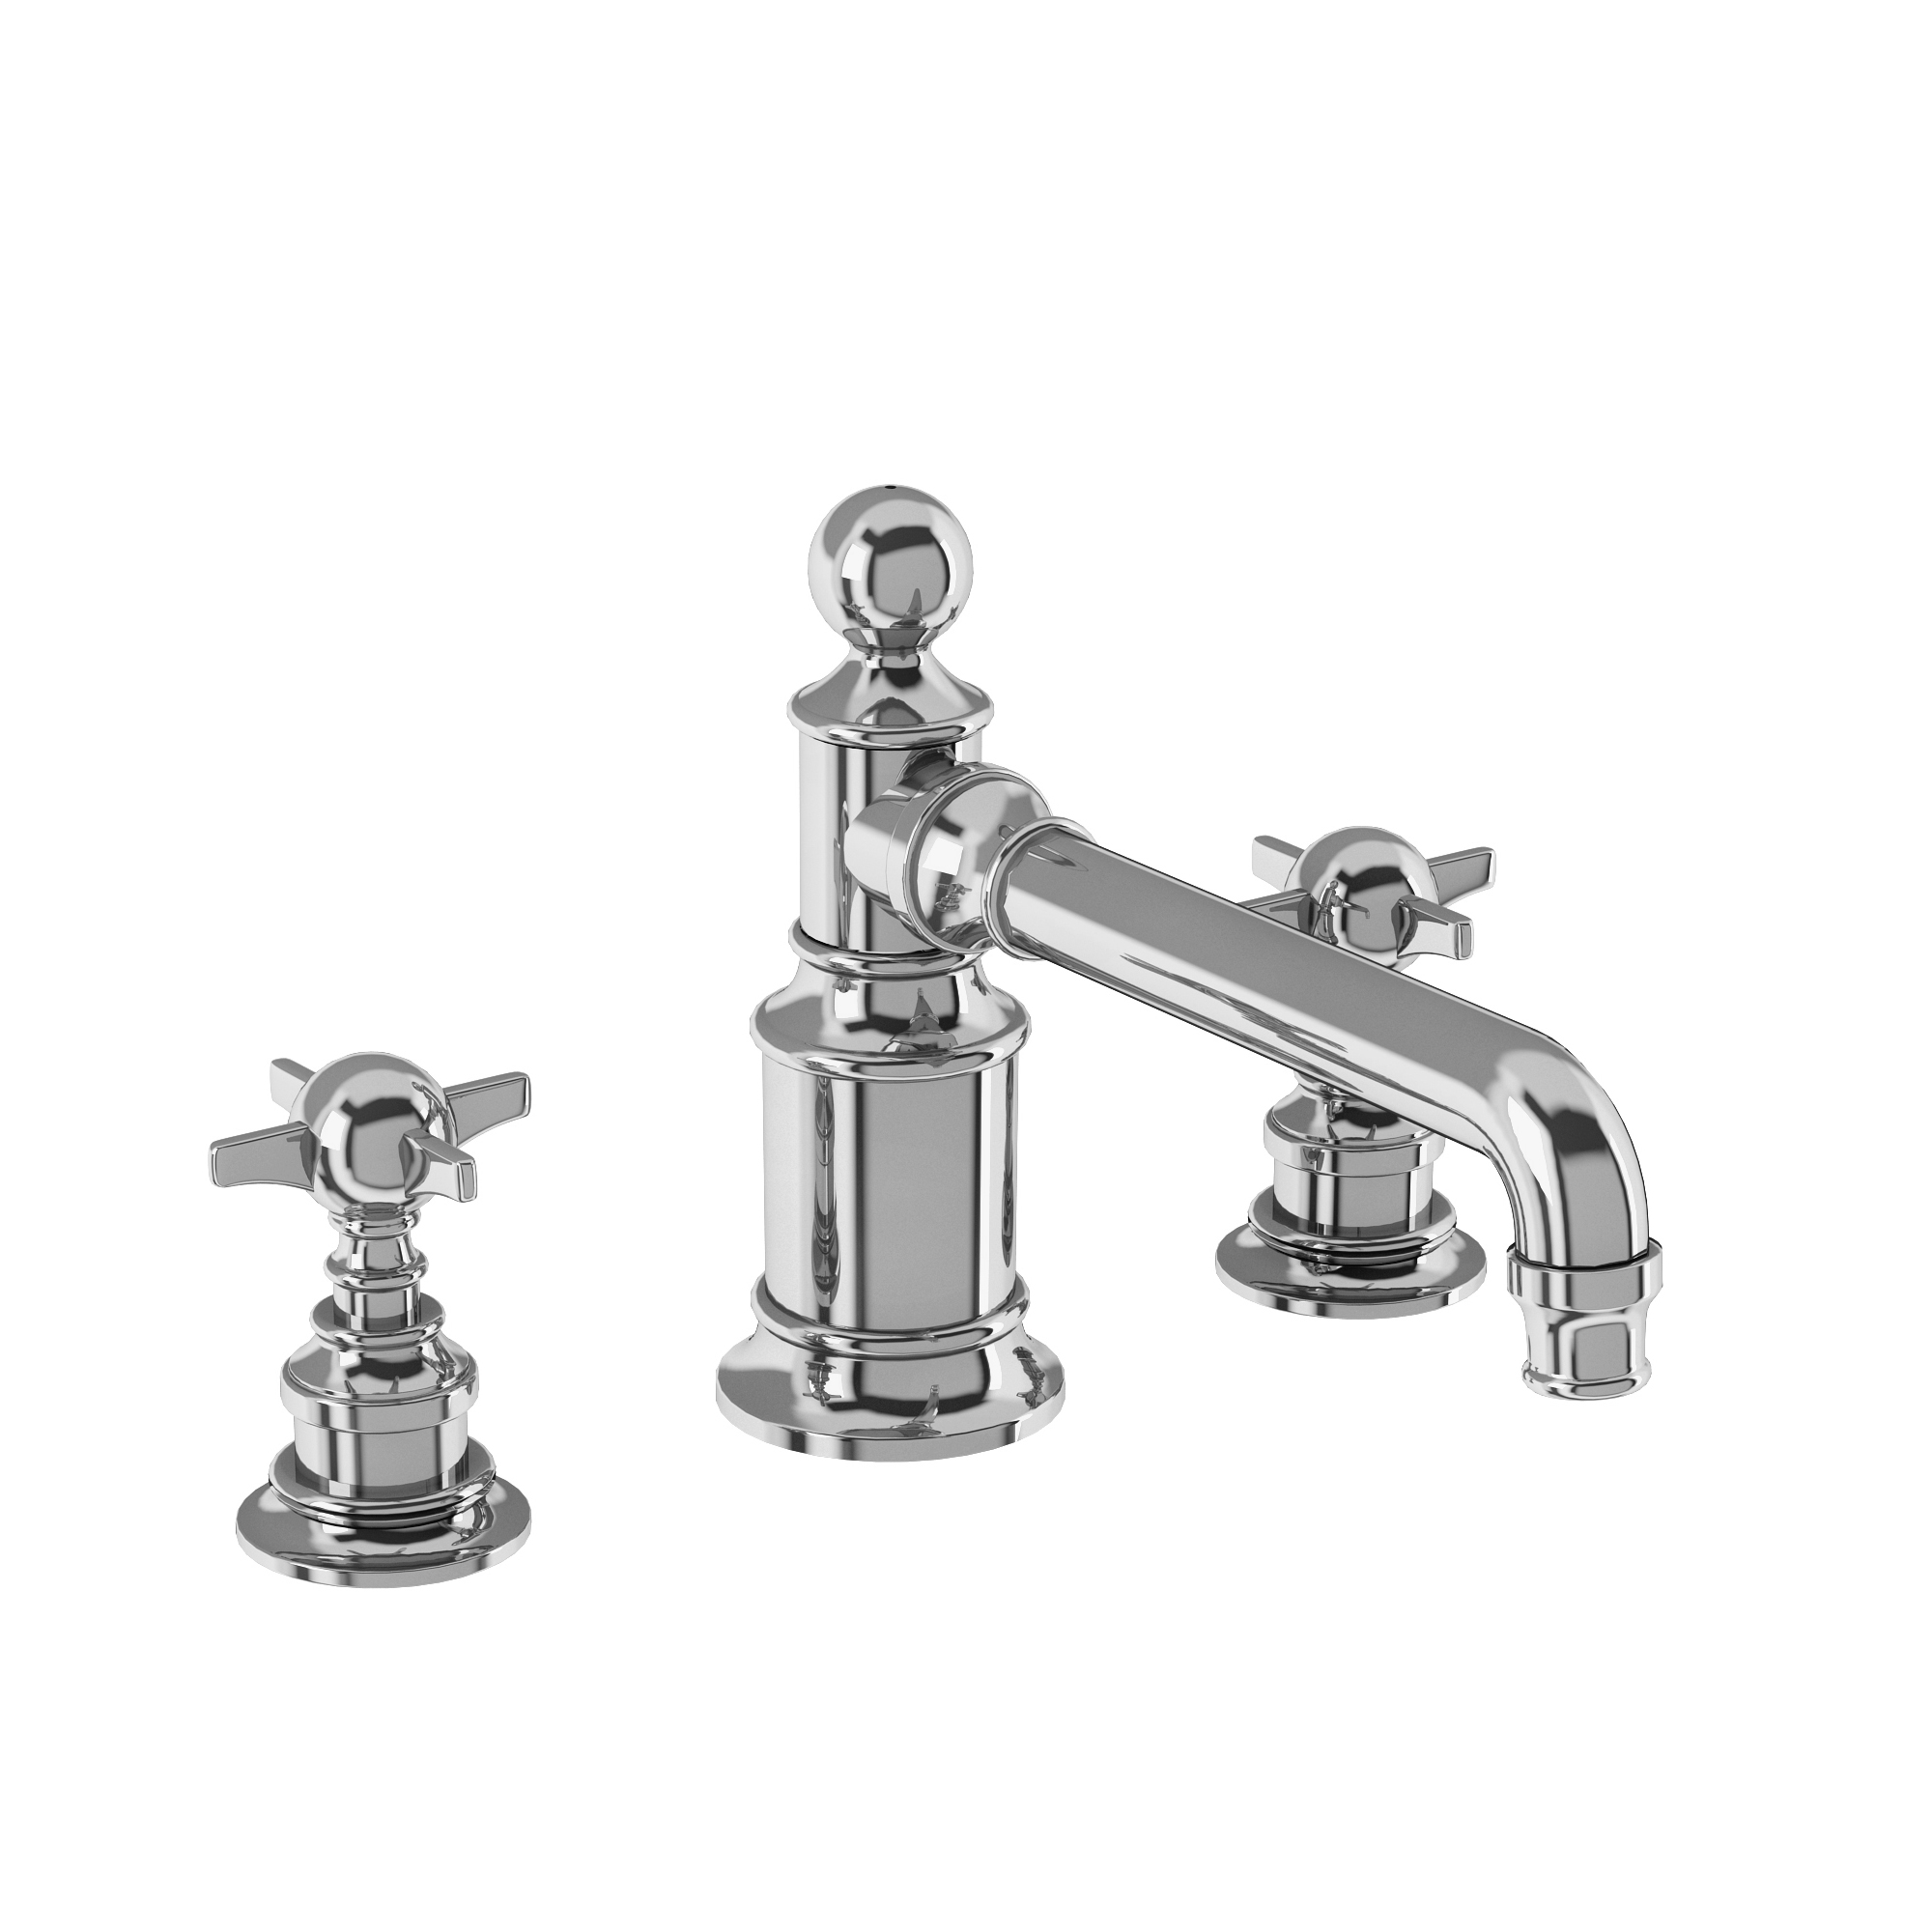 Arcade Three hole basin mixer deck-mounted without pop up waste - chrome - with tap handle